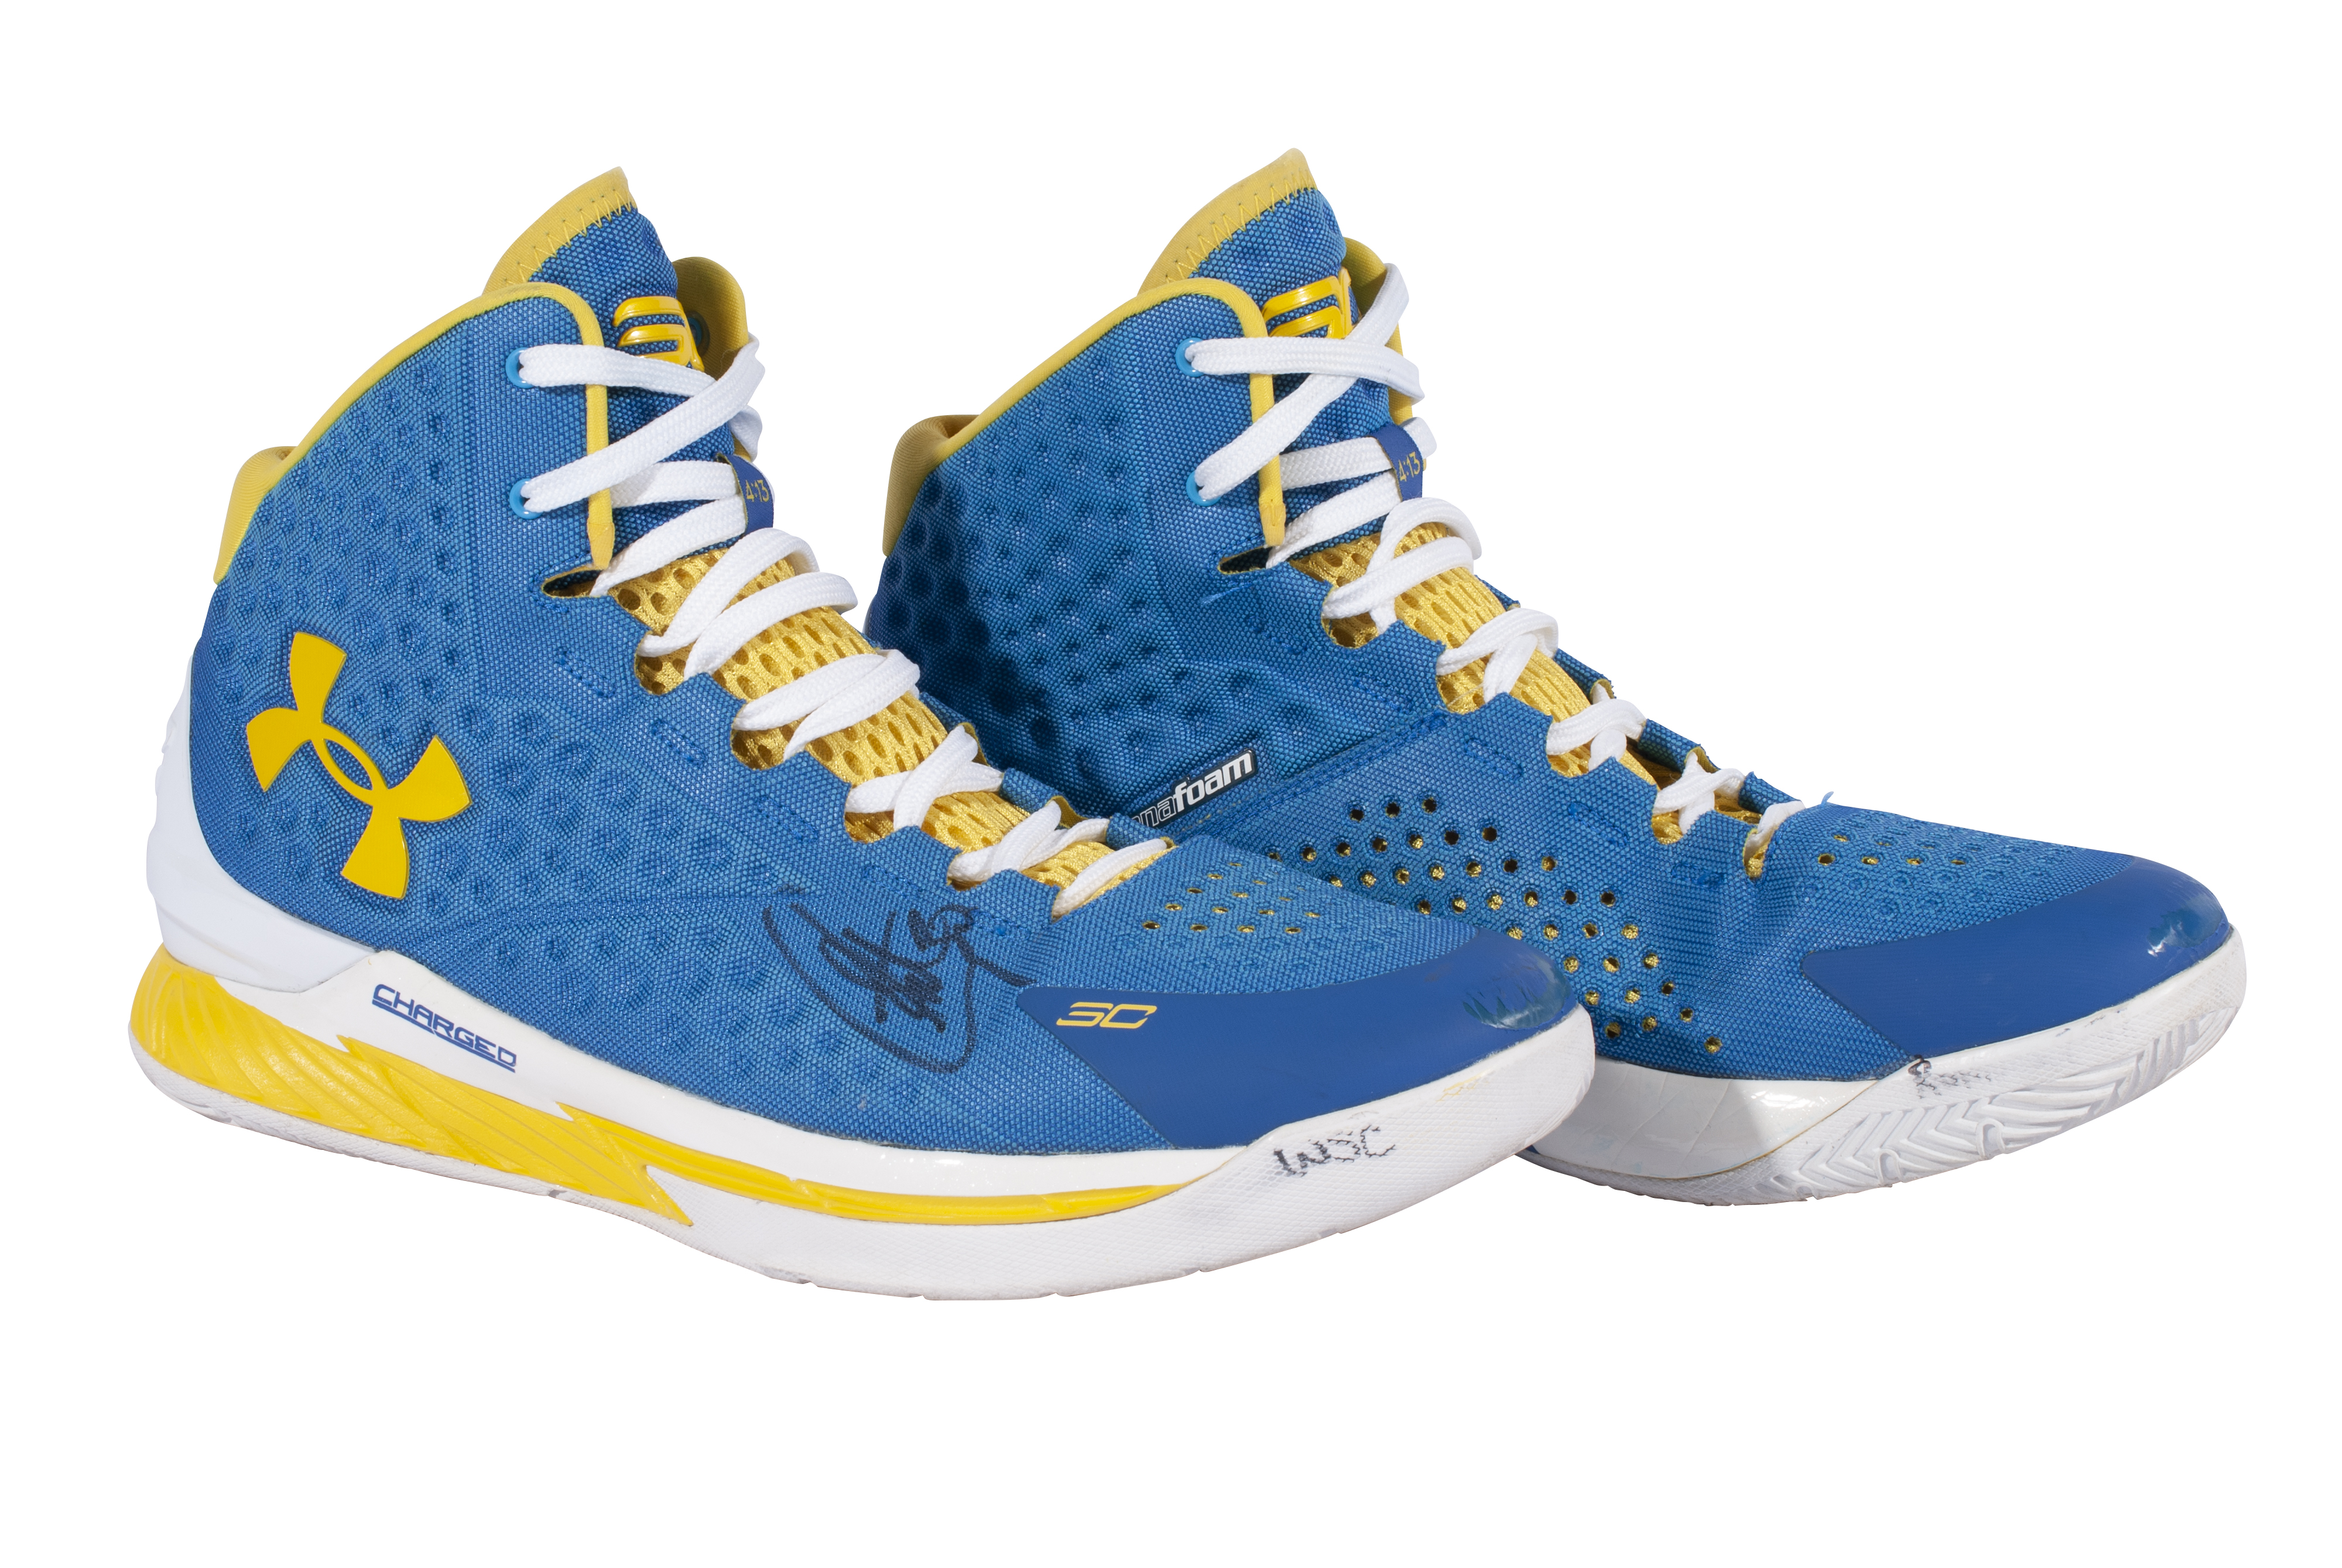 Steph Curry's game worn jersey and shoes while making NBA history